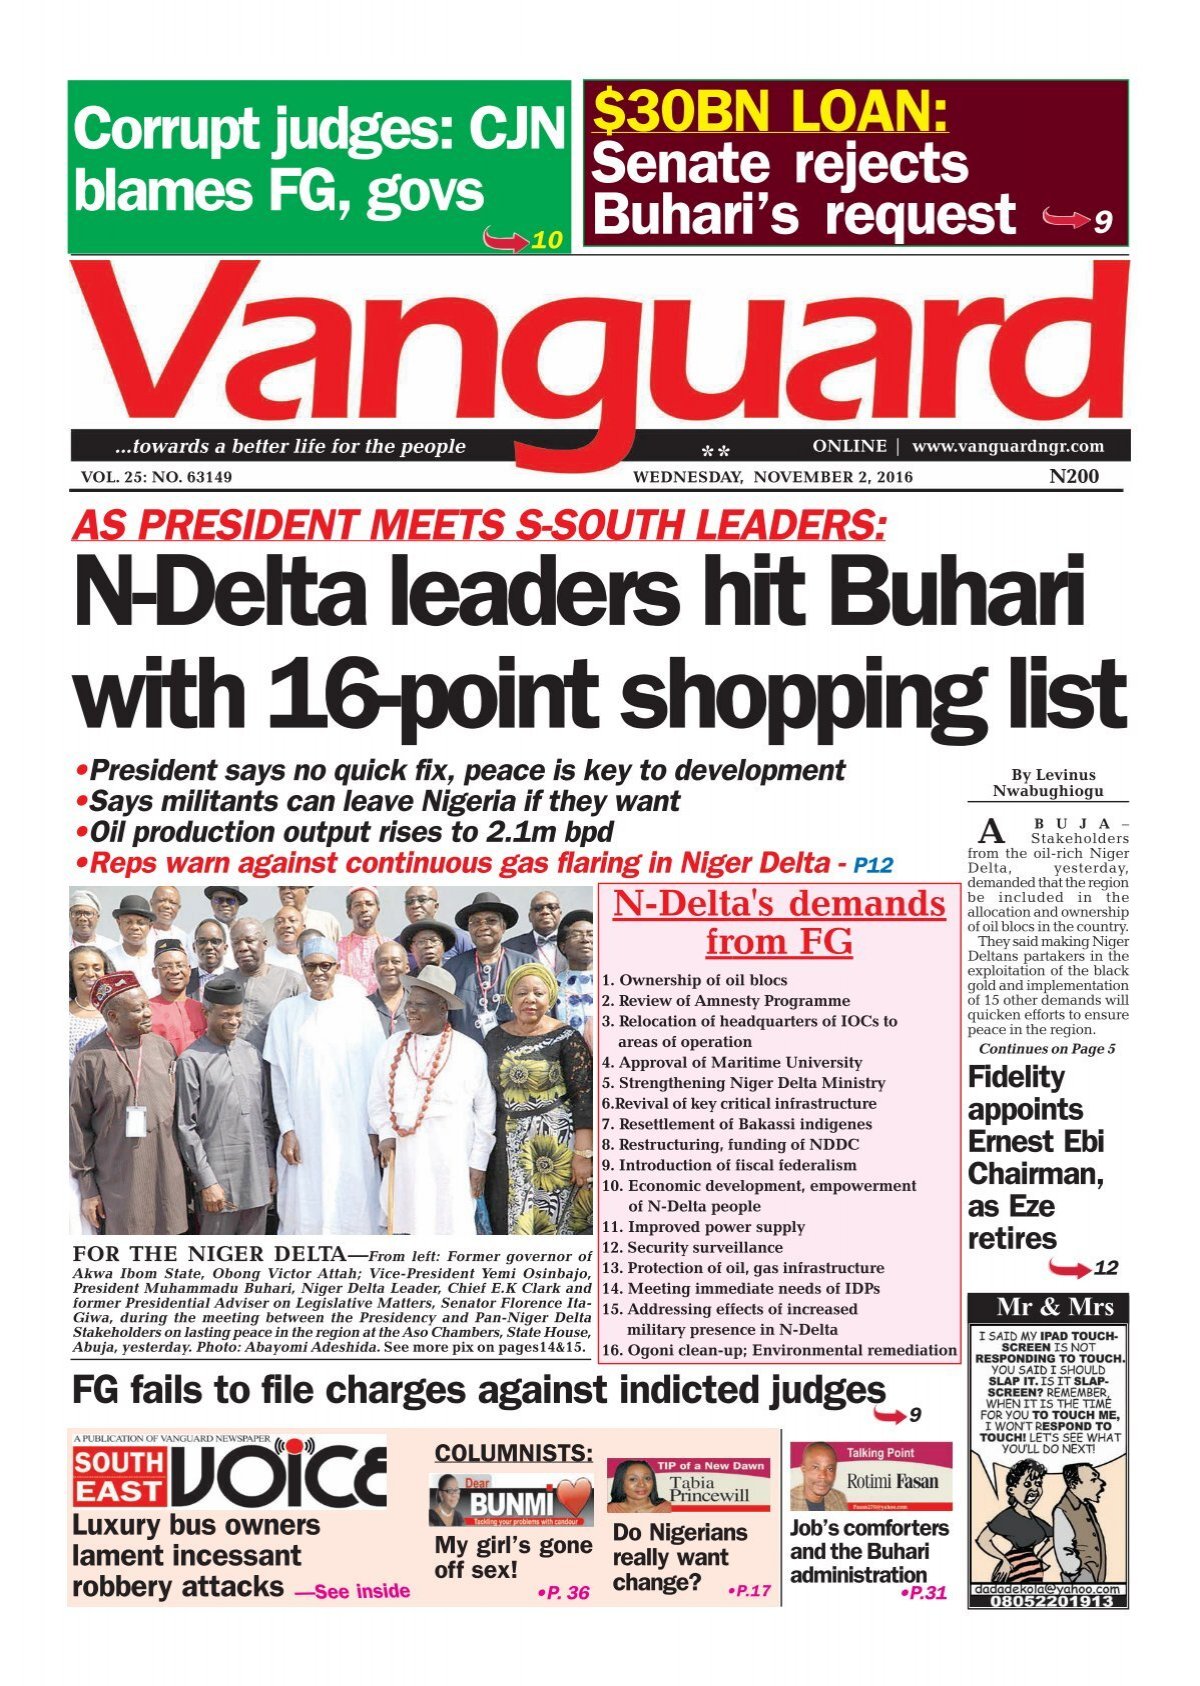 AS PRESIDENT MEETS S-SOUTH LEADERS N-Delta leaders hit Buhari with 16-point shopping list